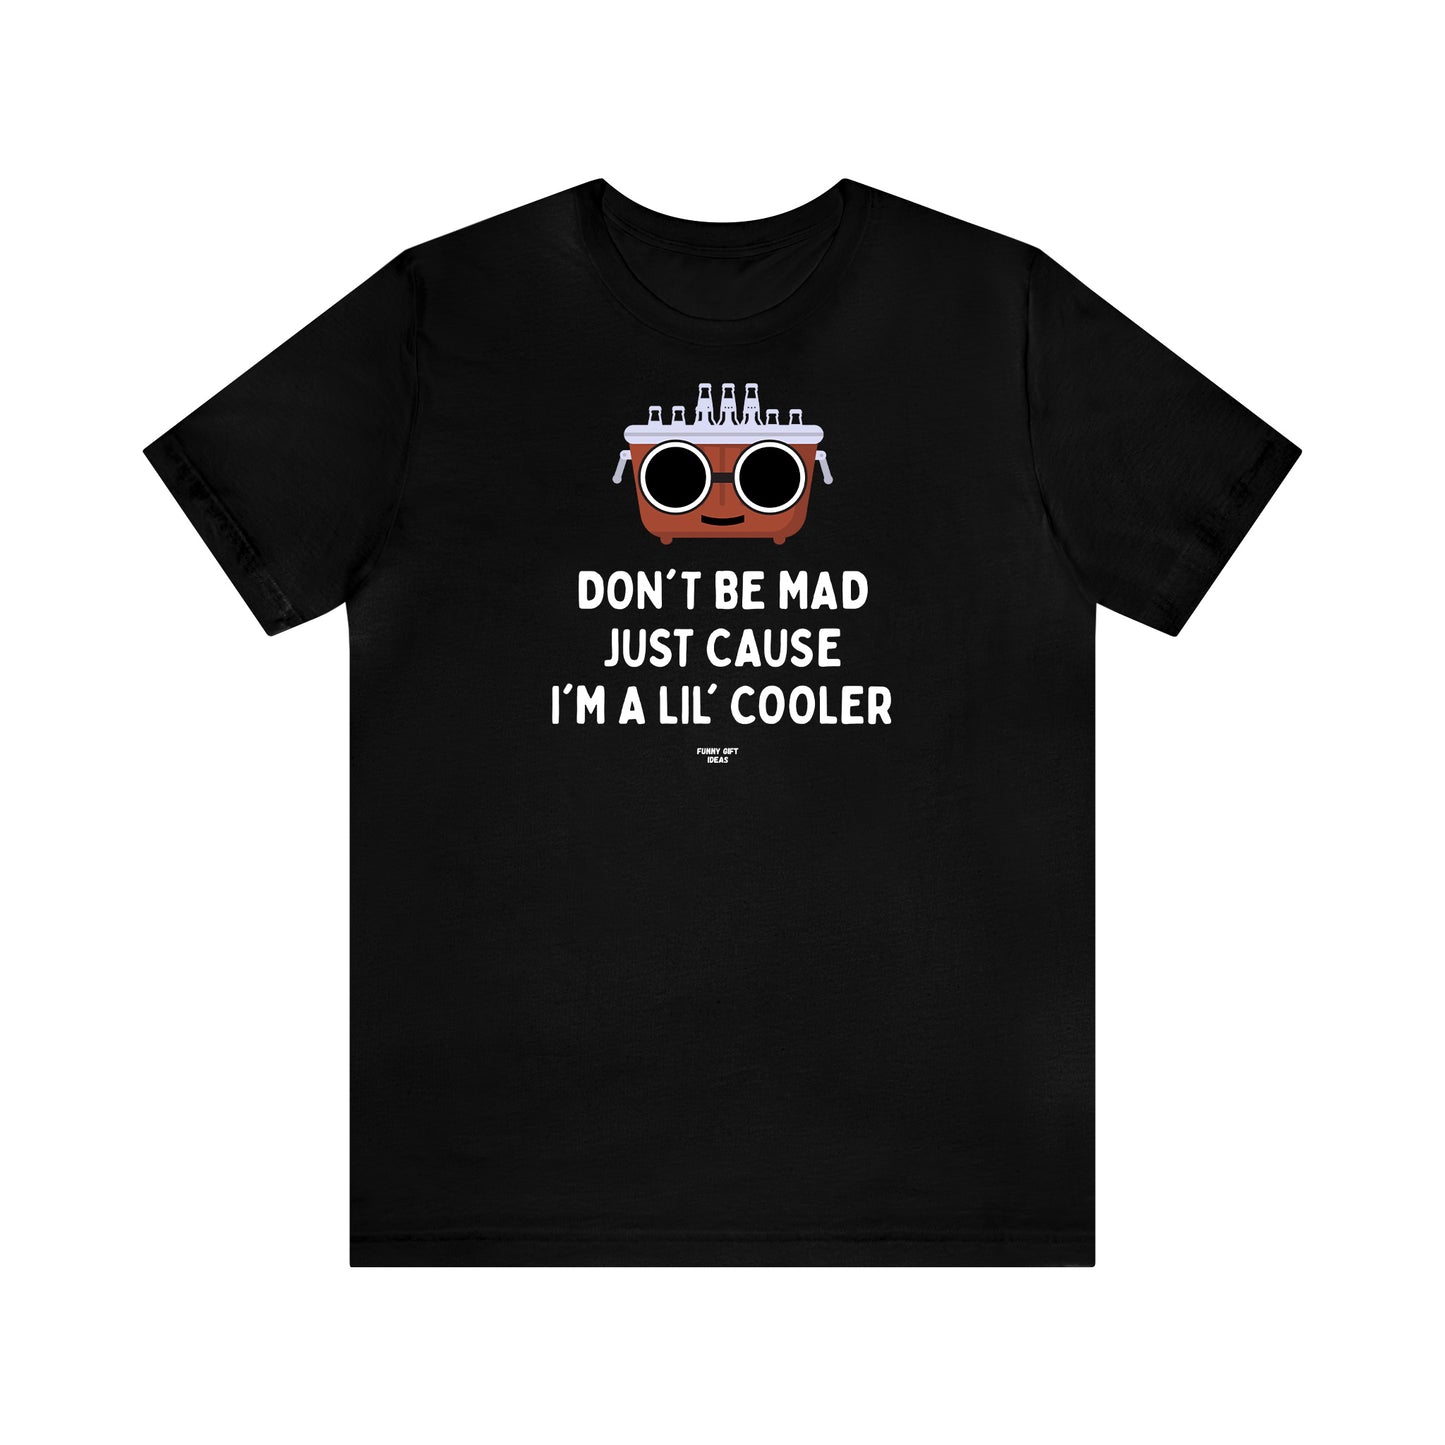 Mens T Shirts - Don't Be Mad Just Cause I'm a Lil' Cooler - Funny Men T Shirts